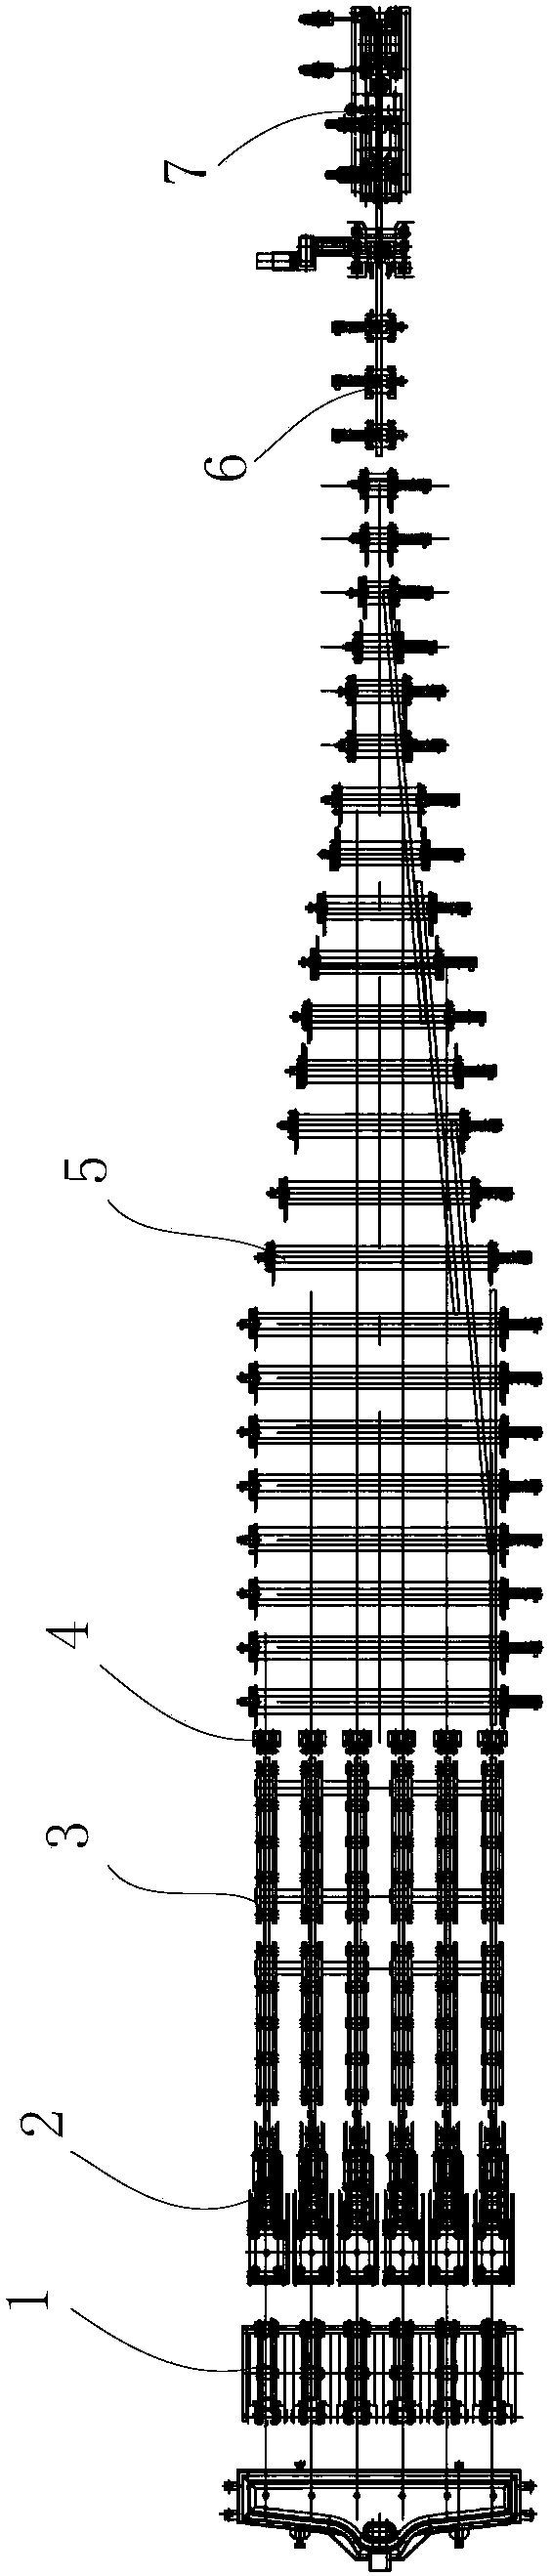 A heating-free direct rolling system and method for continuous casting slabs of wire and rod